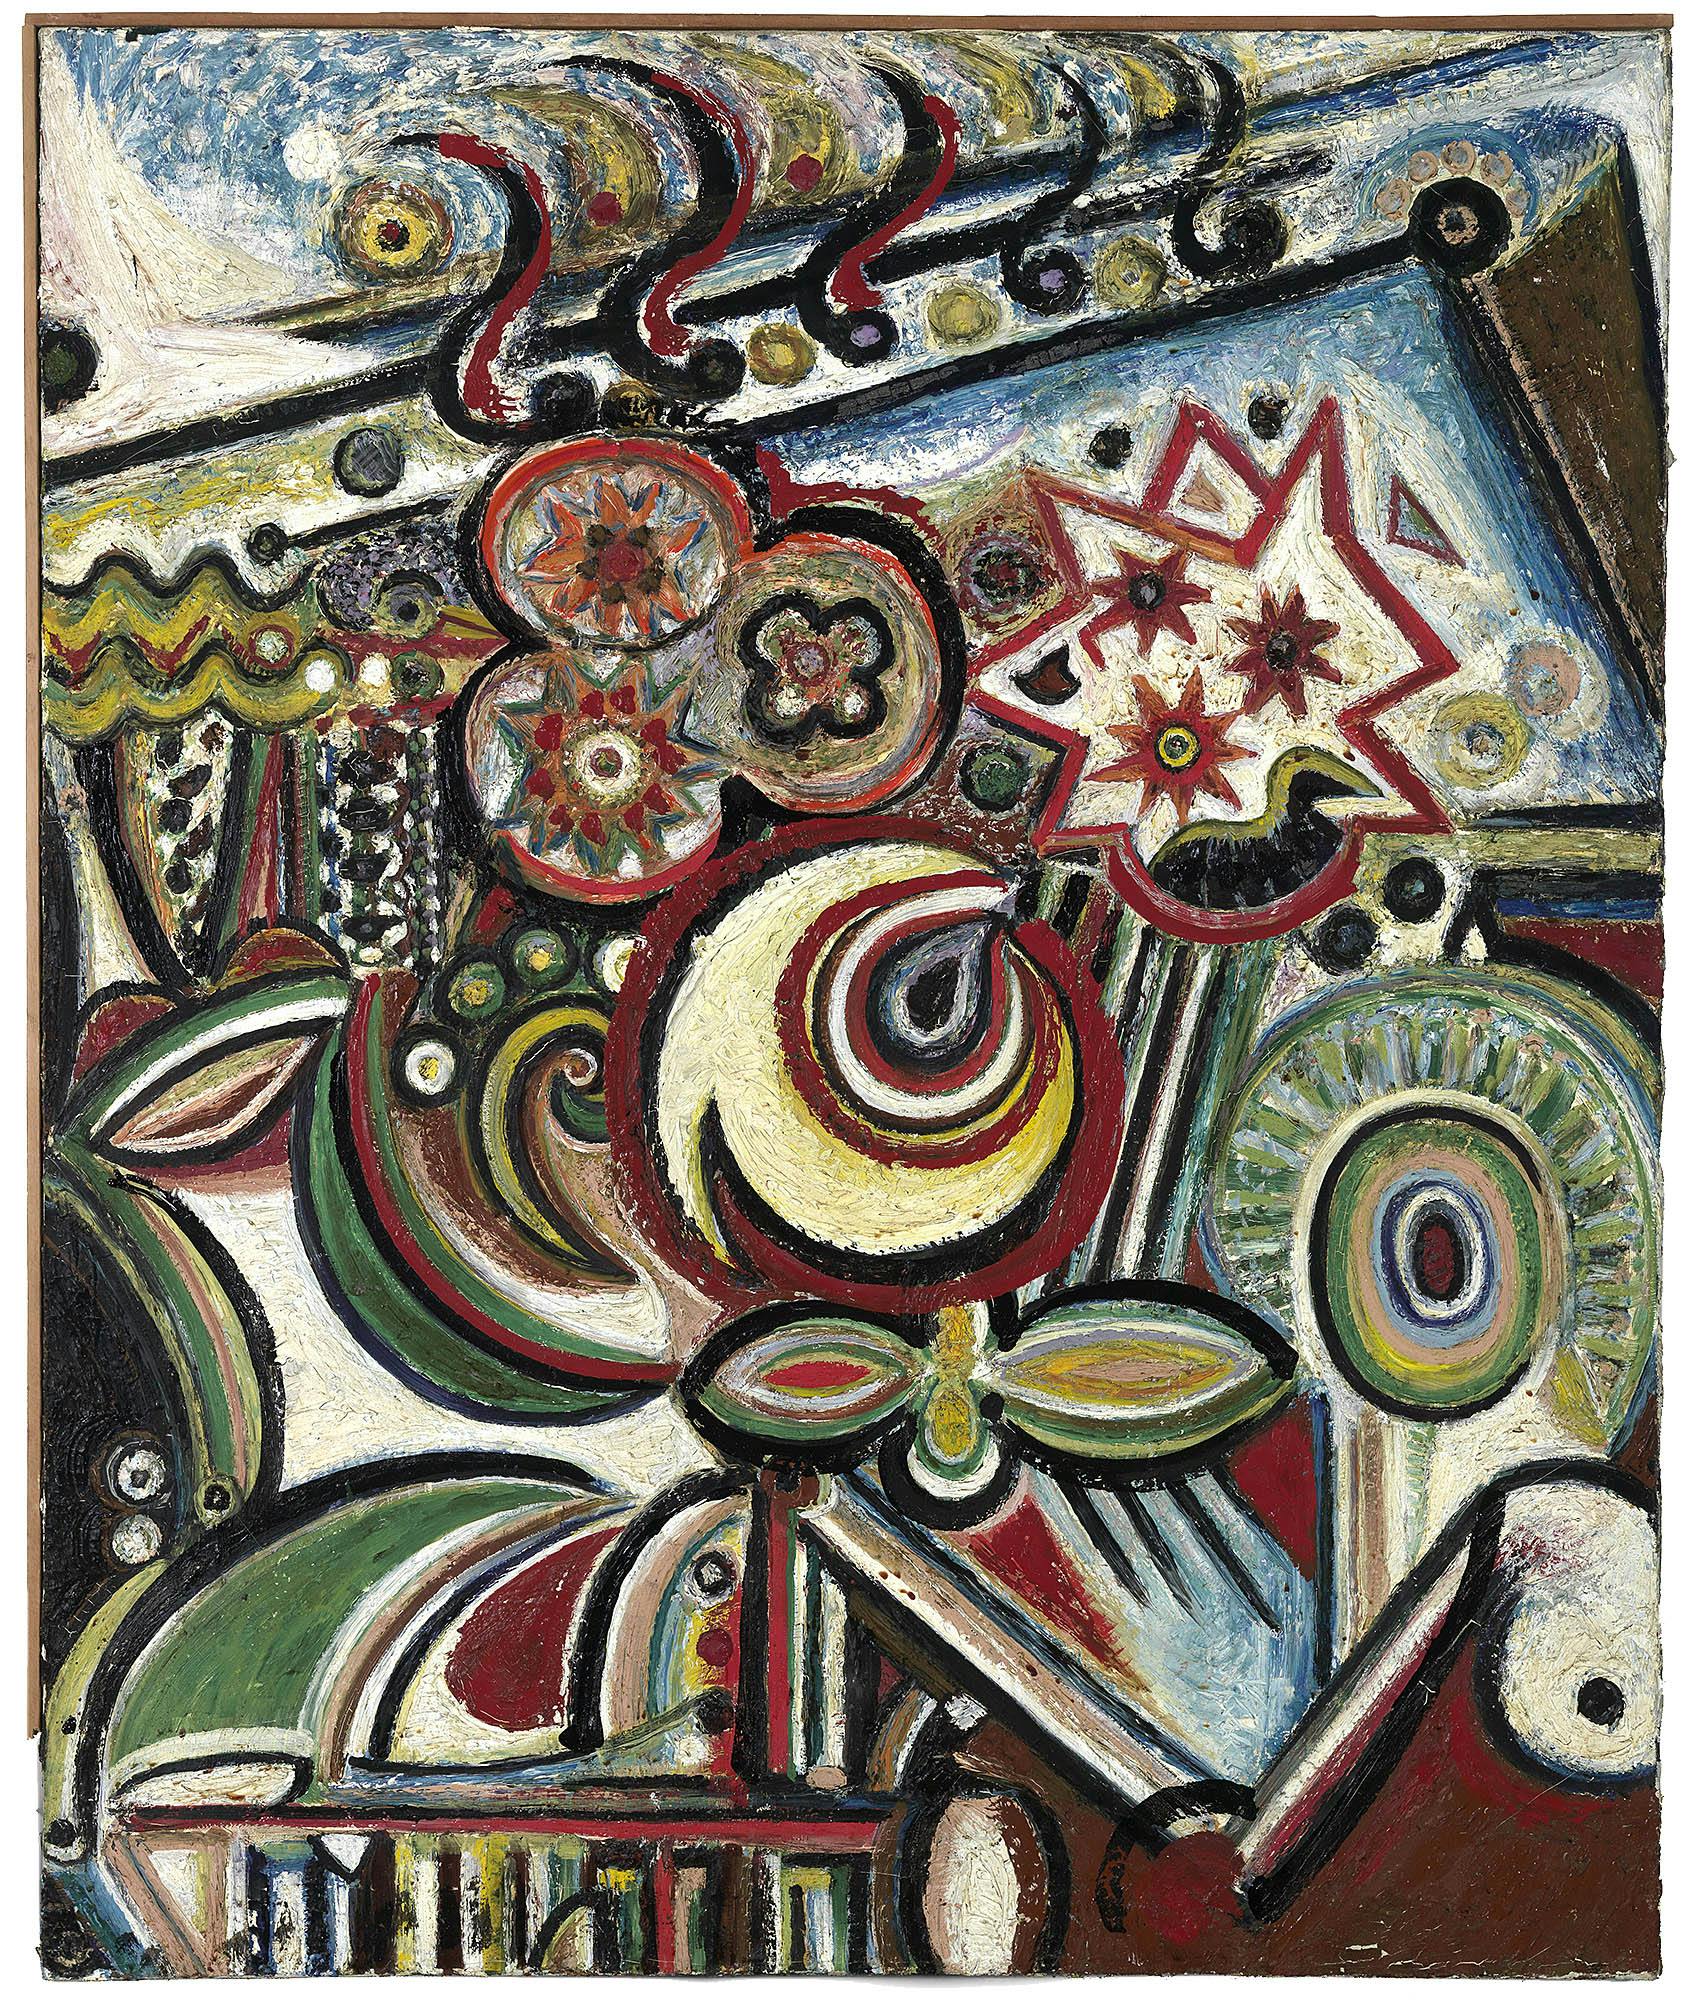 _Play of Fire_, 1944, oil on canvas, 36 ¼ x 30 in (92.1 x 76.2 cm), Smith College Museum of Art, Northampton, MA, Gift of Jonathan Marshall (1955:17)
 – The Richard Pousette-Dart Foundation